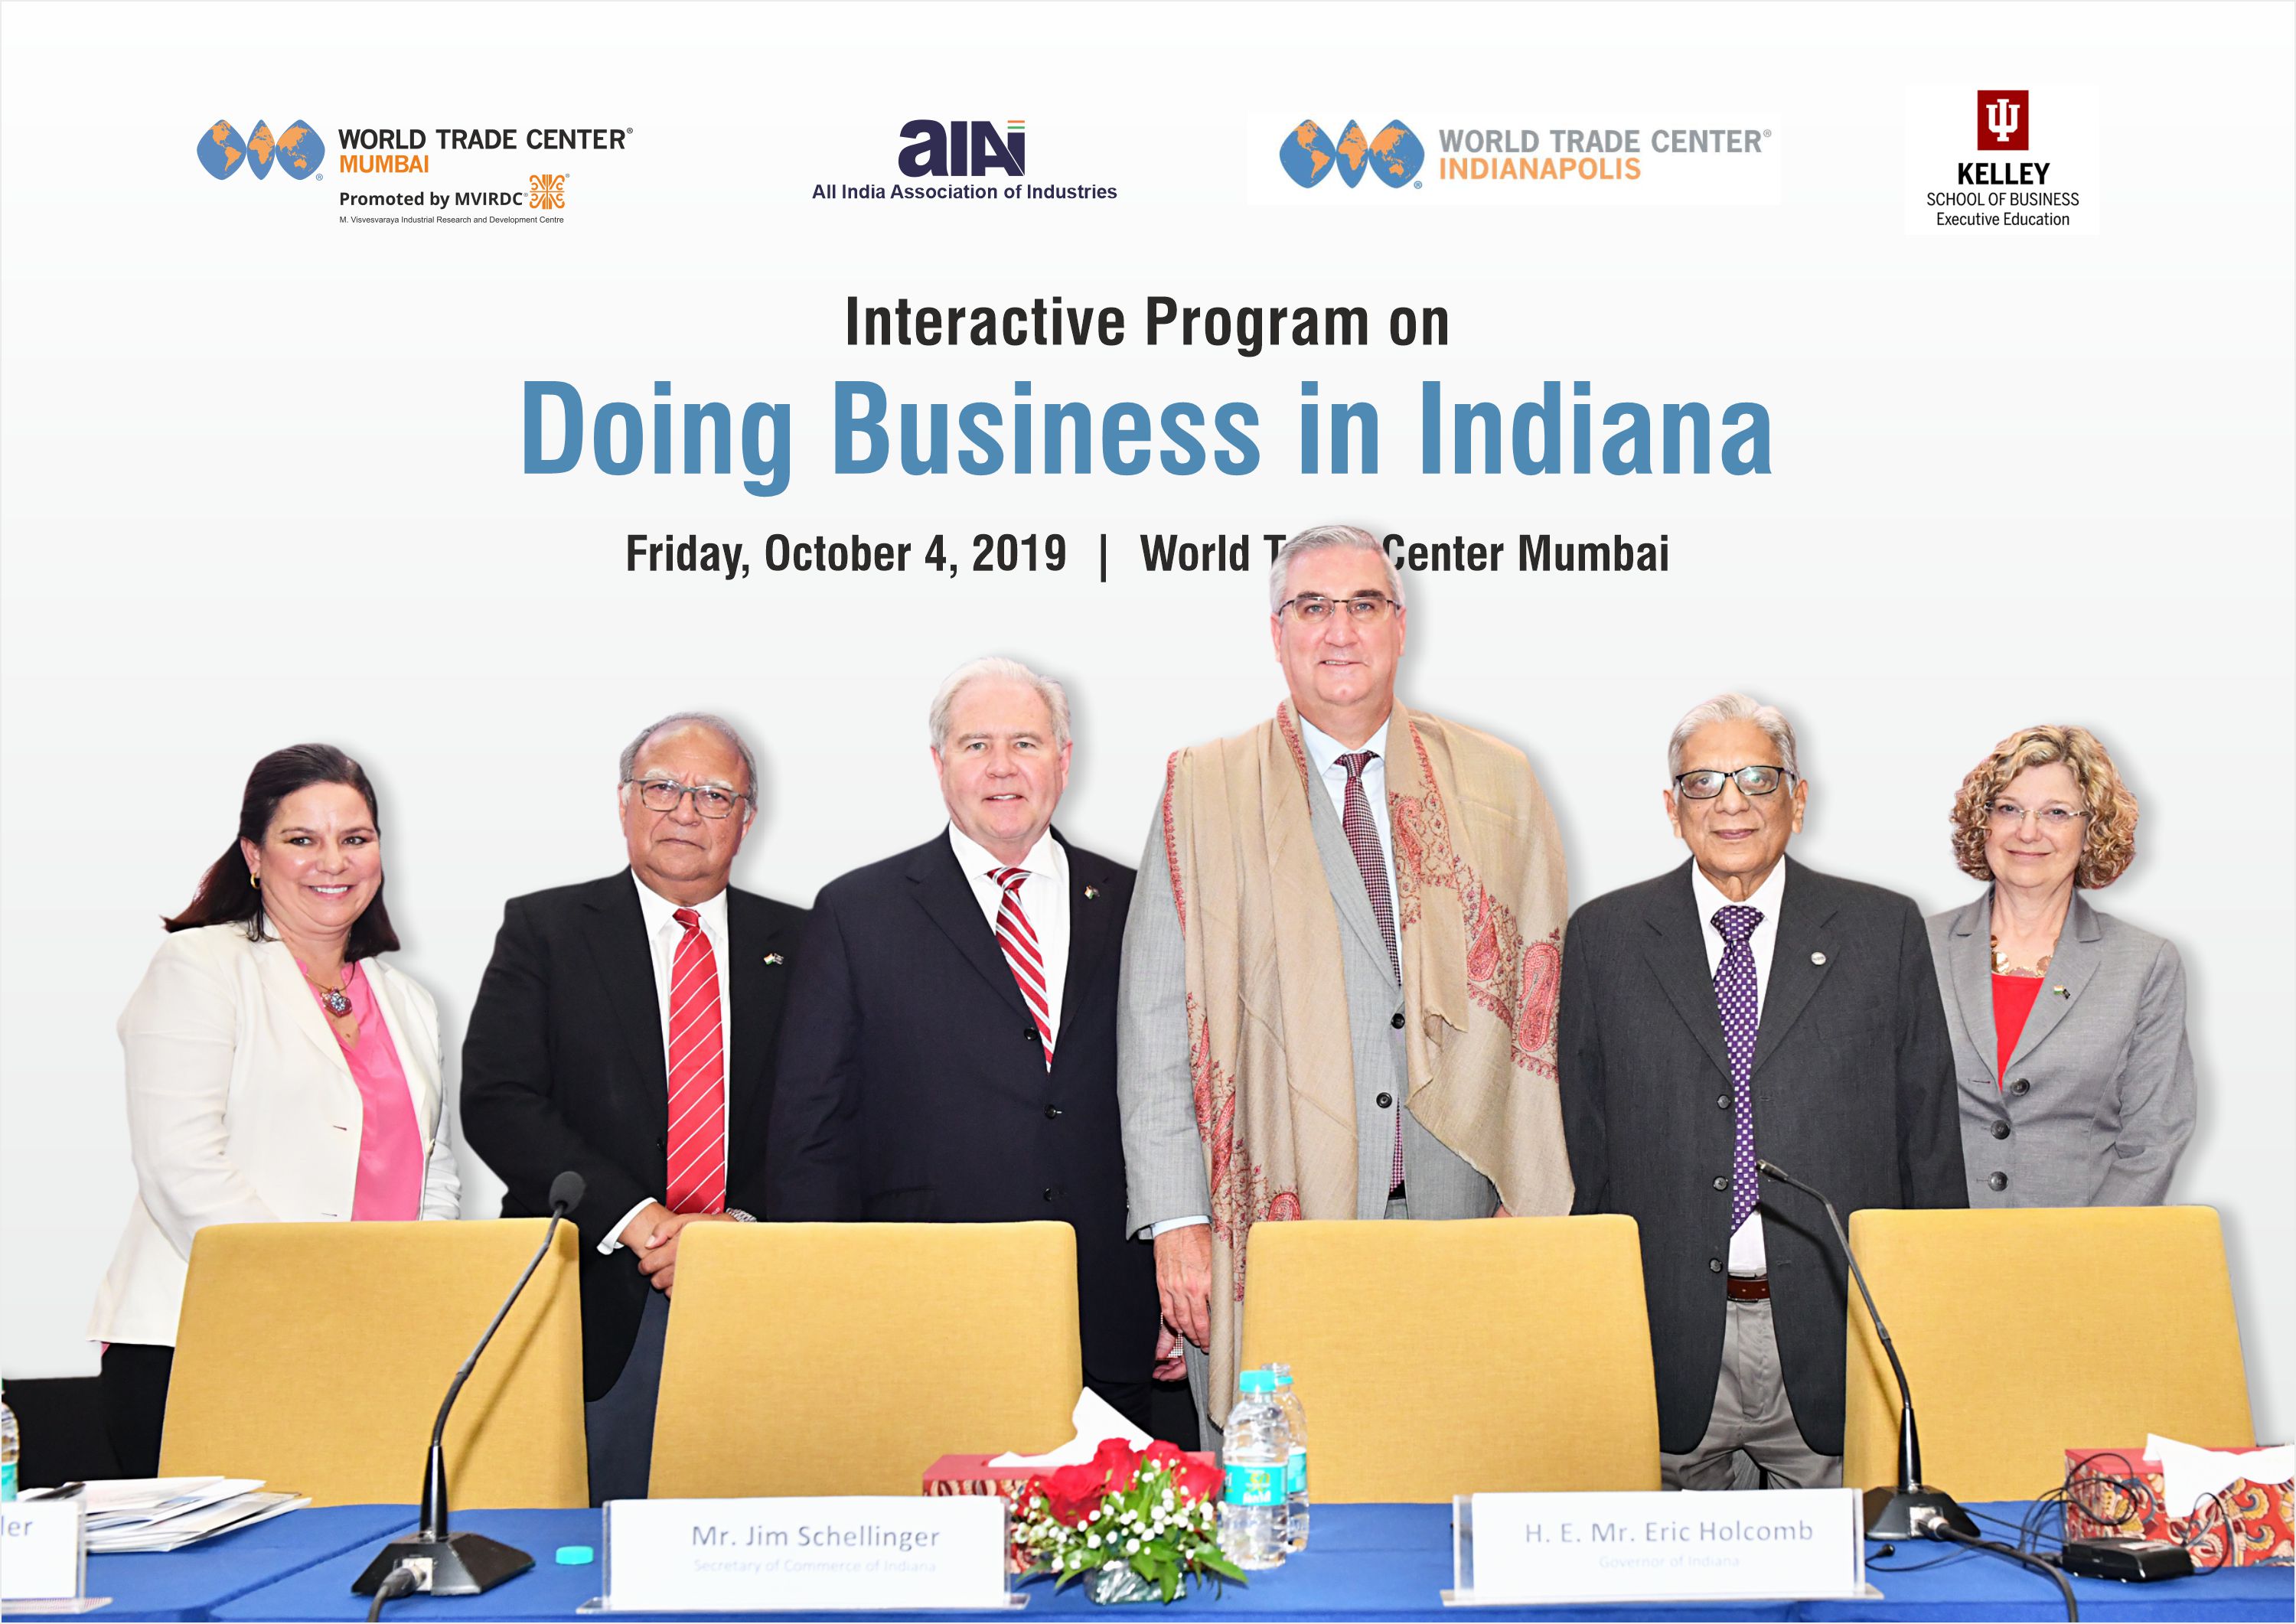 L-R: Ms. Doris Anne Sadler, President and CEO of World Trade Center Indianapolis, Mr. Ash Soni, Associate Dean of Academic Programmes, Kelley School of Business, Mr. Jim Schellinger, Secretary of Commerce, Indiana, Mr. Eric Holcomb, Governor of Indiana, USA, Mr. Y.R. Warerkar, Director General, MVIRDC World Trade Center and Ms. Idie Kesner, Dean of the Kelley School of Business at an interactive programme on ‘Doing Business in Indiana’, in Mumbai - Photo By Sachin Murdeshwar / GPN